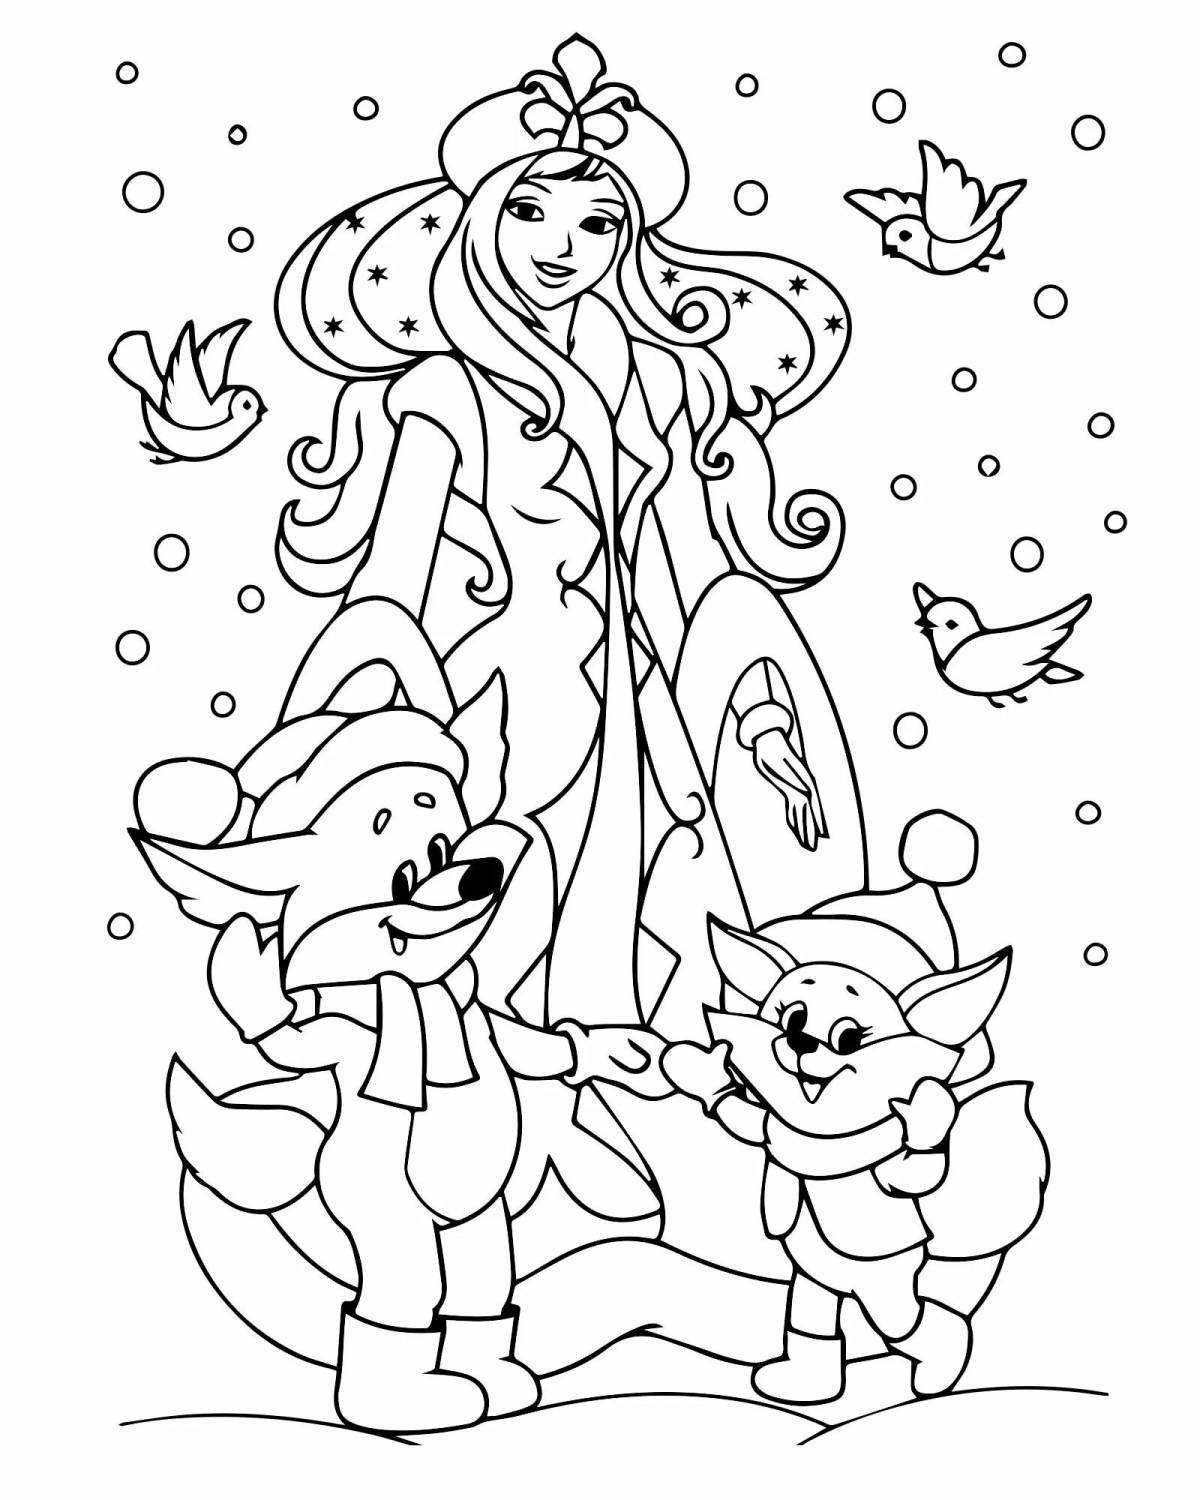 Wonderful Snow Maiden coloring by numbers